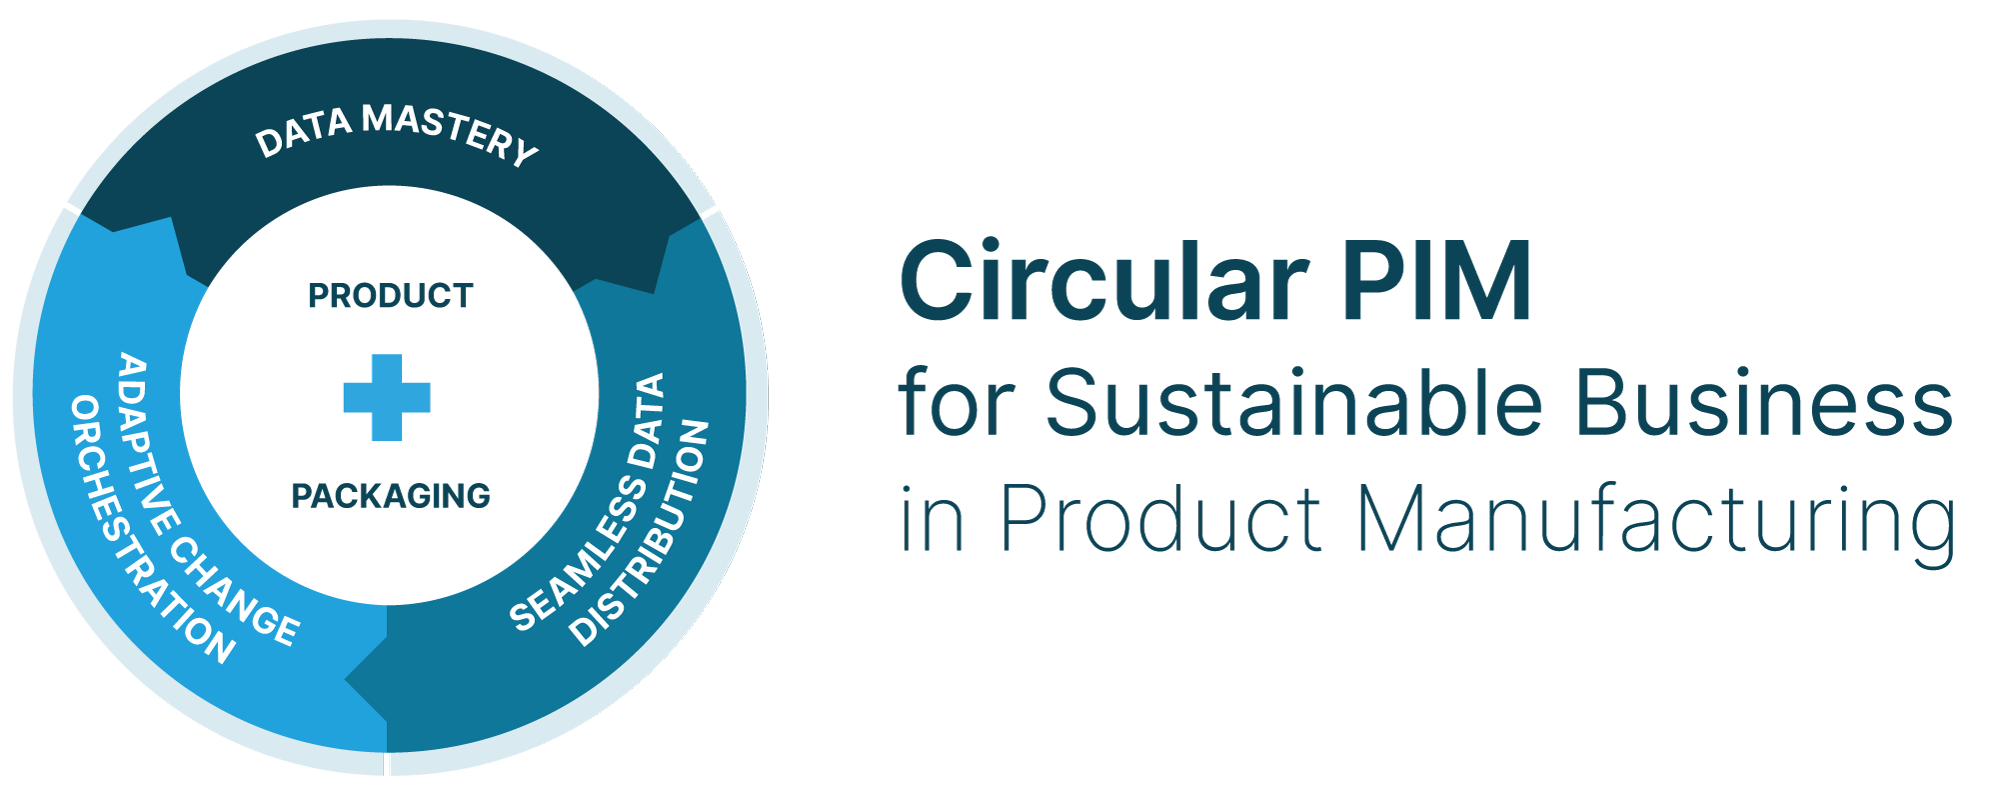 SyncForce Circular PIM for Sustainable Business in Product Manufacturing. Data Mastery, Seamless Data Distribution, Adaptive Change Orchestration.